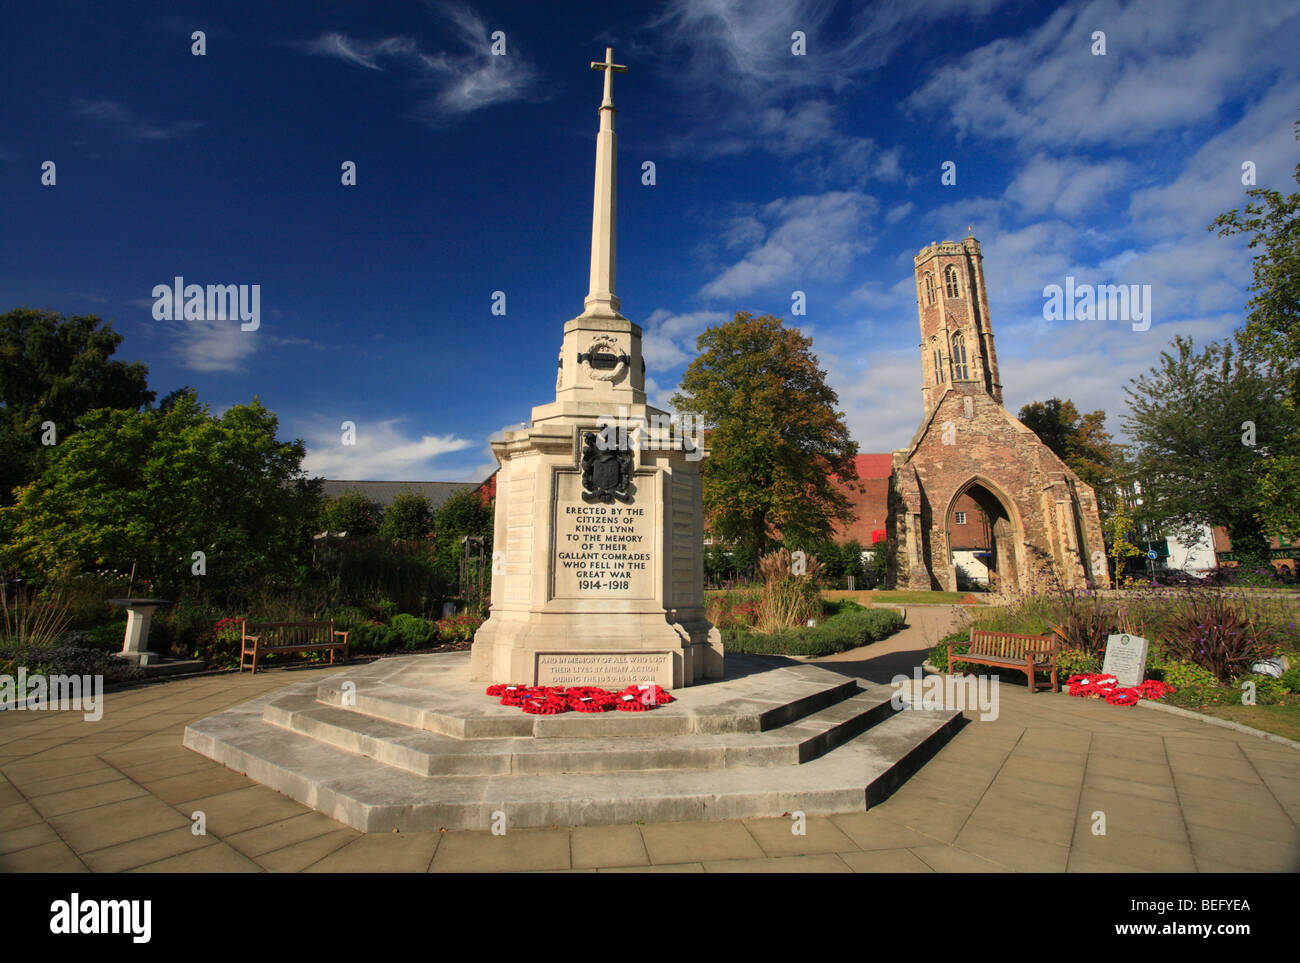 The war memorial and Greyfriars Tower in Tower Gardens King's Lynn, Norfolk. Stock Photo